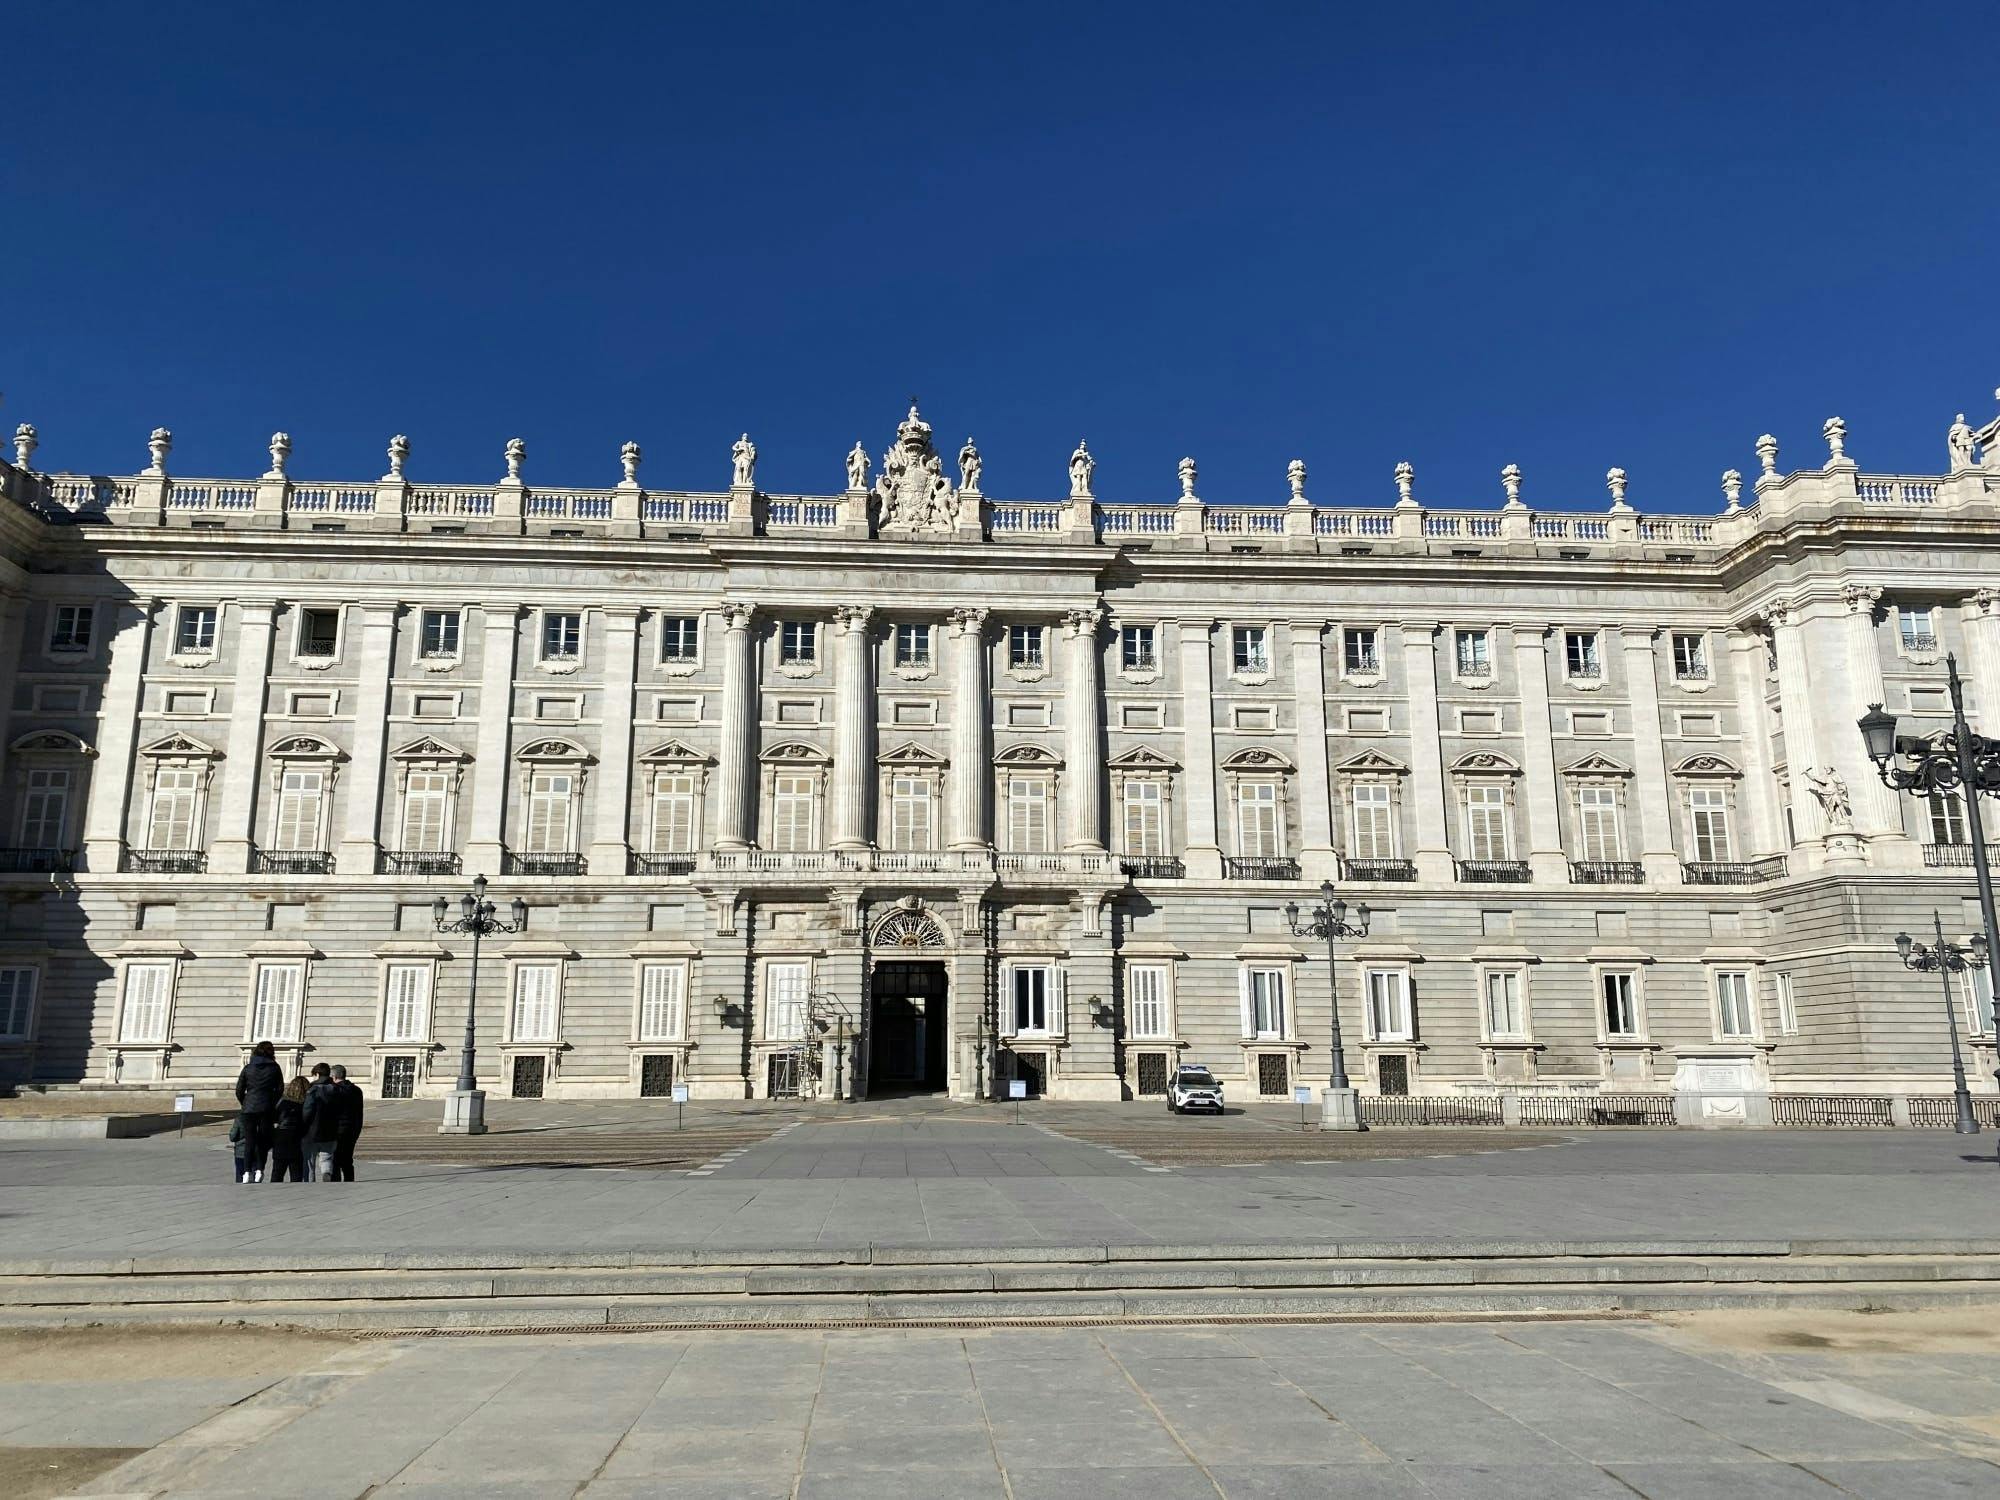 Madrid's Royal Palace and Royal Armoury guided tour with tickets